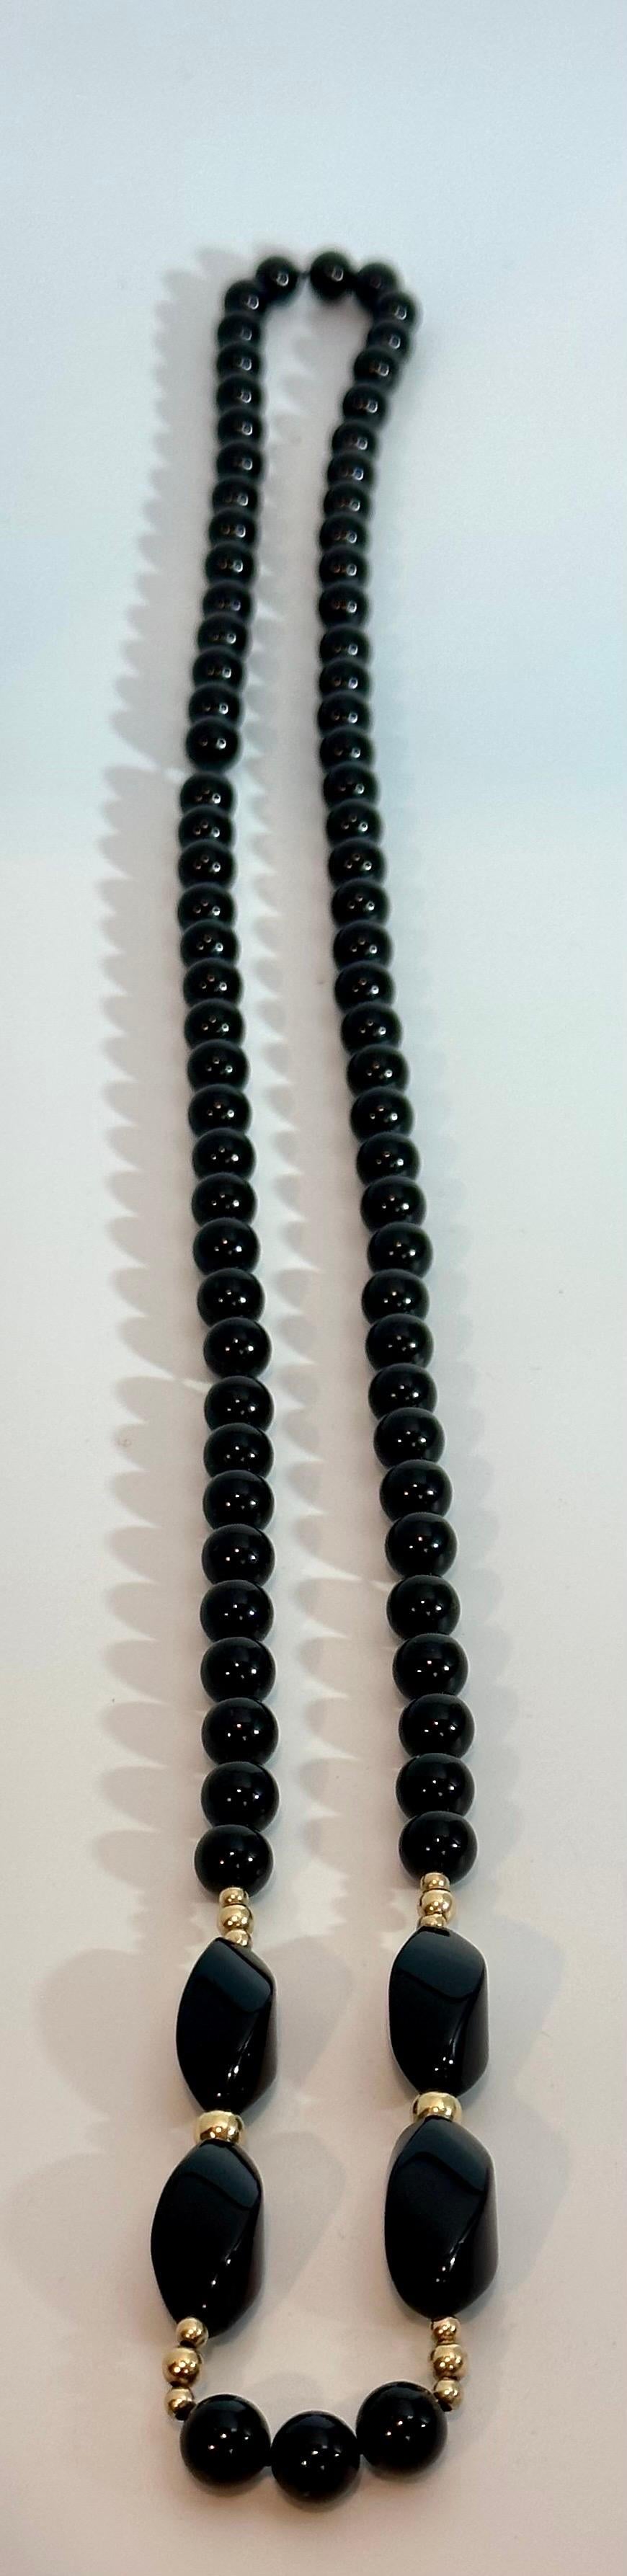 14 inch length necklace